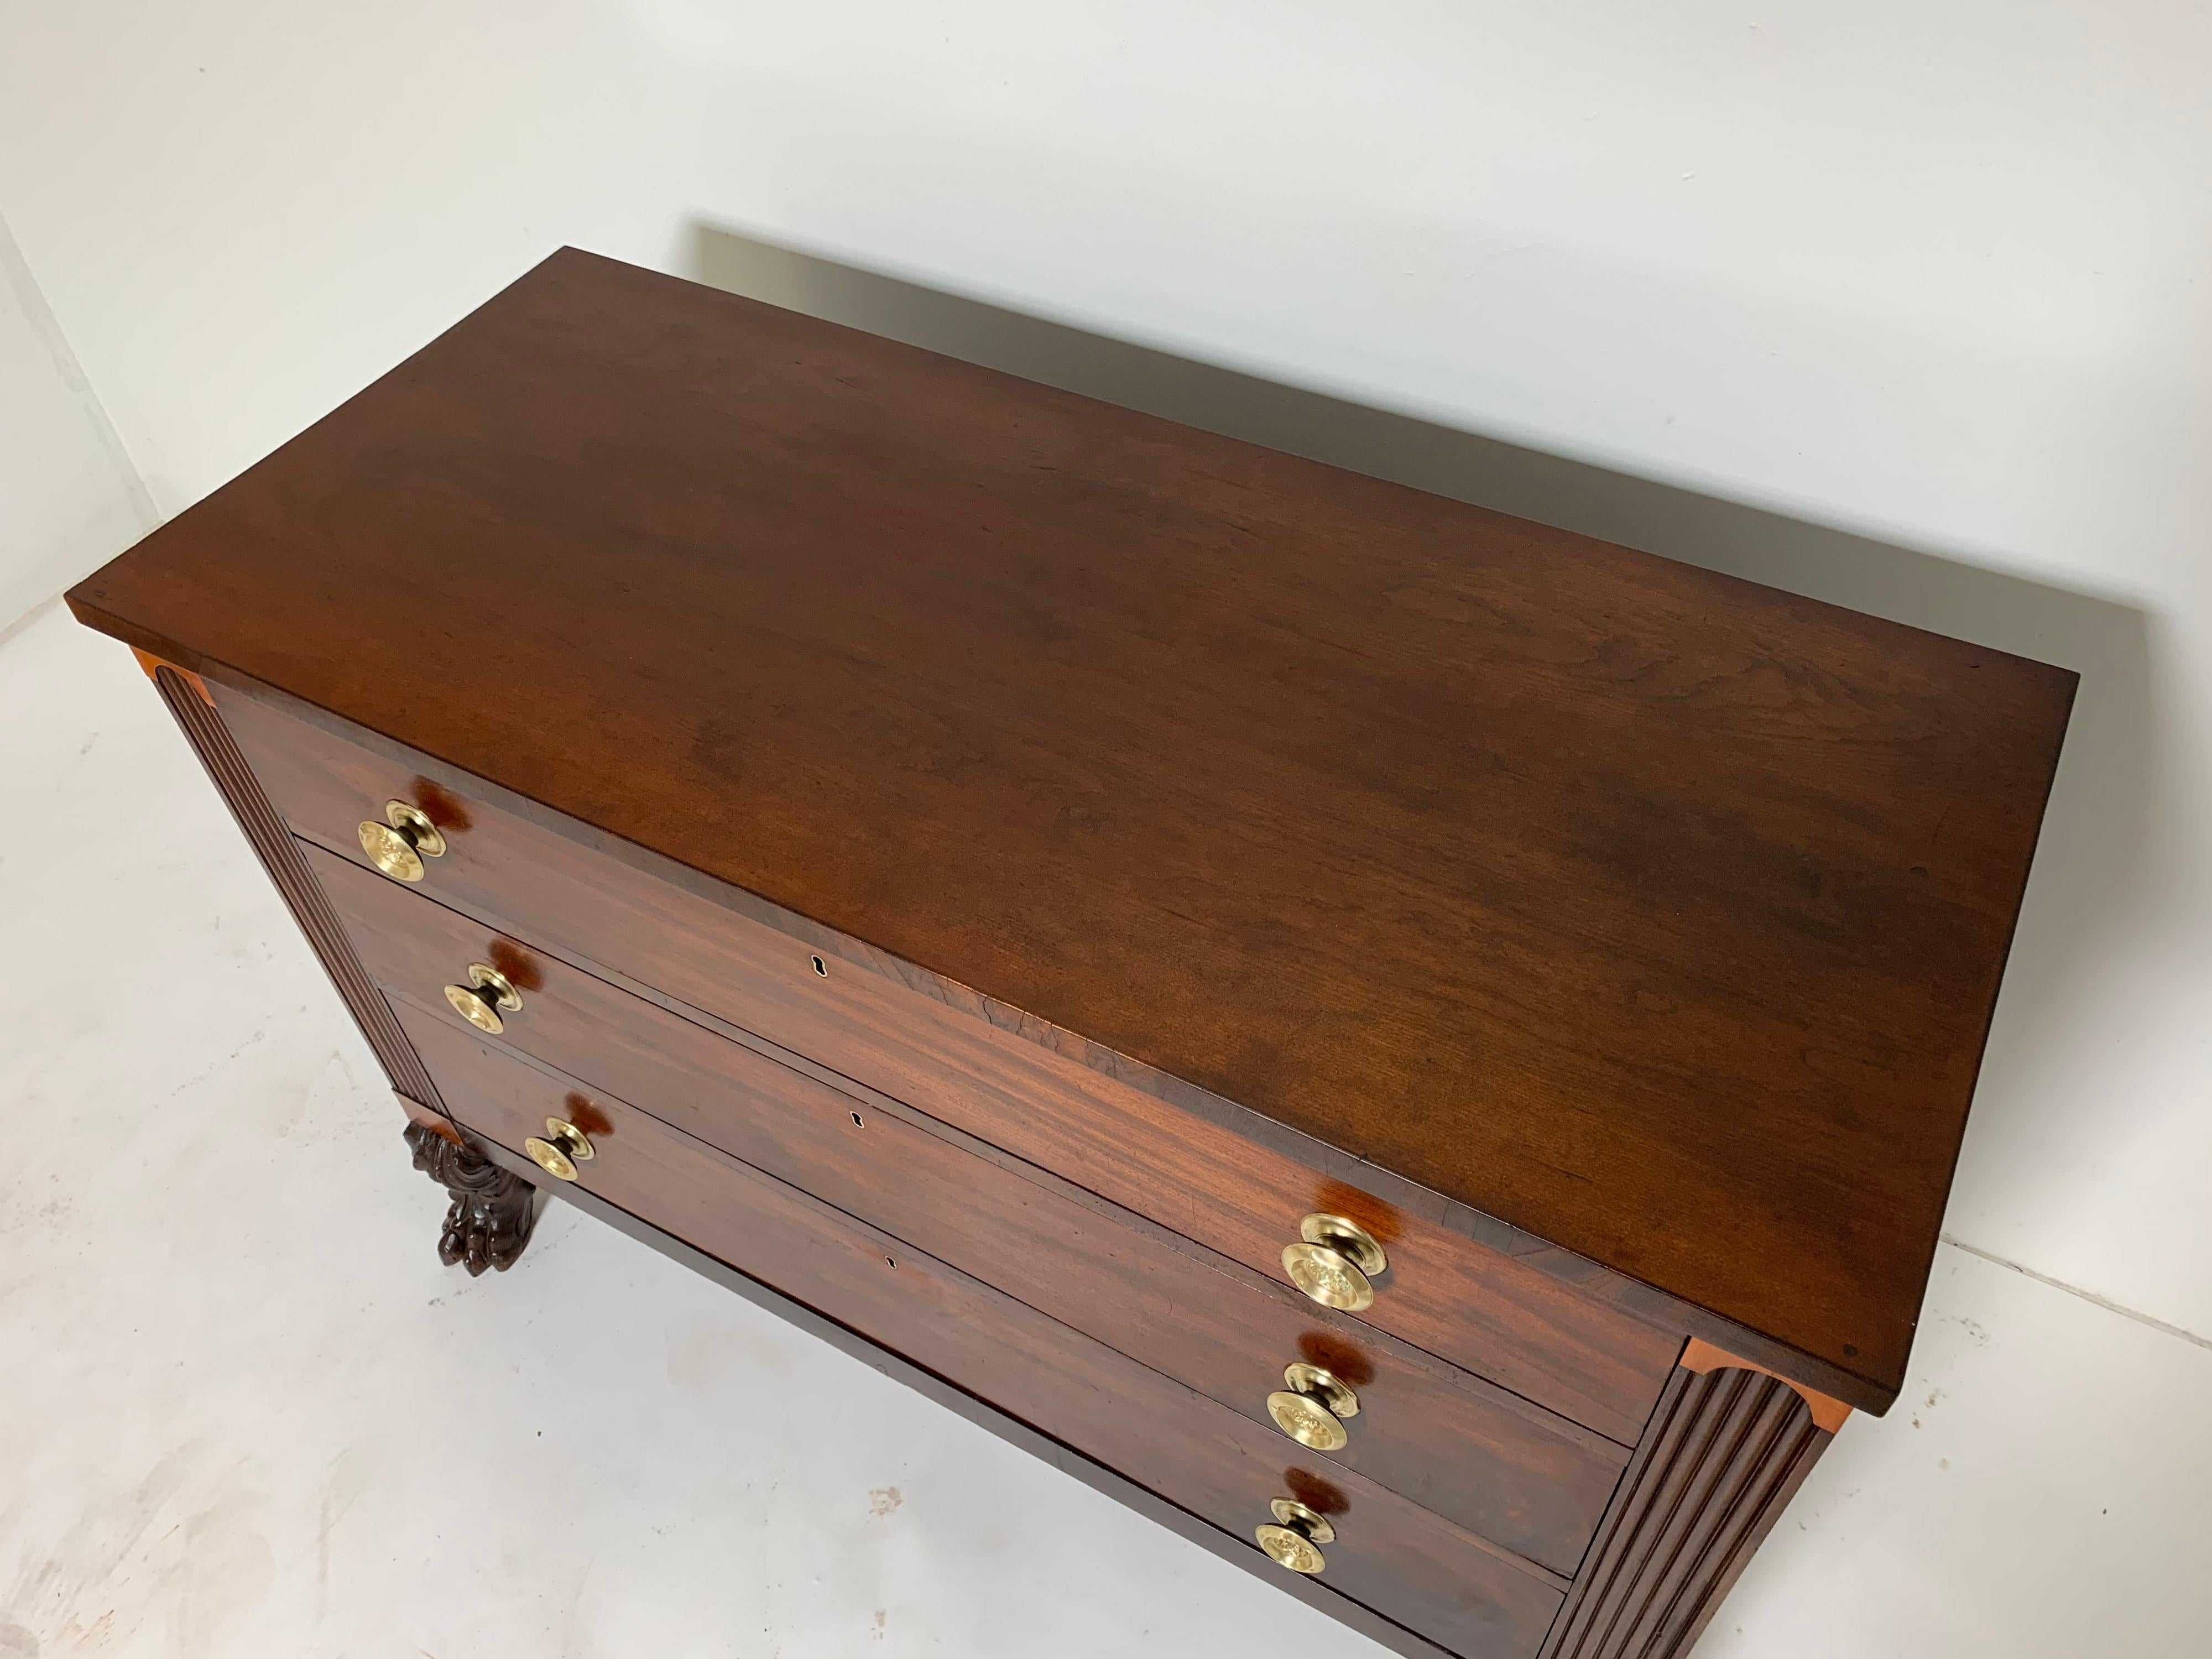 American Antique Federal Chest of Drawers, Rhode Island, circa 1820s